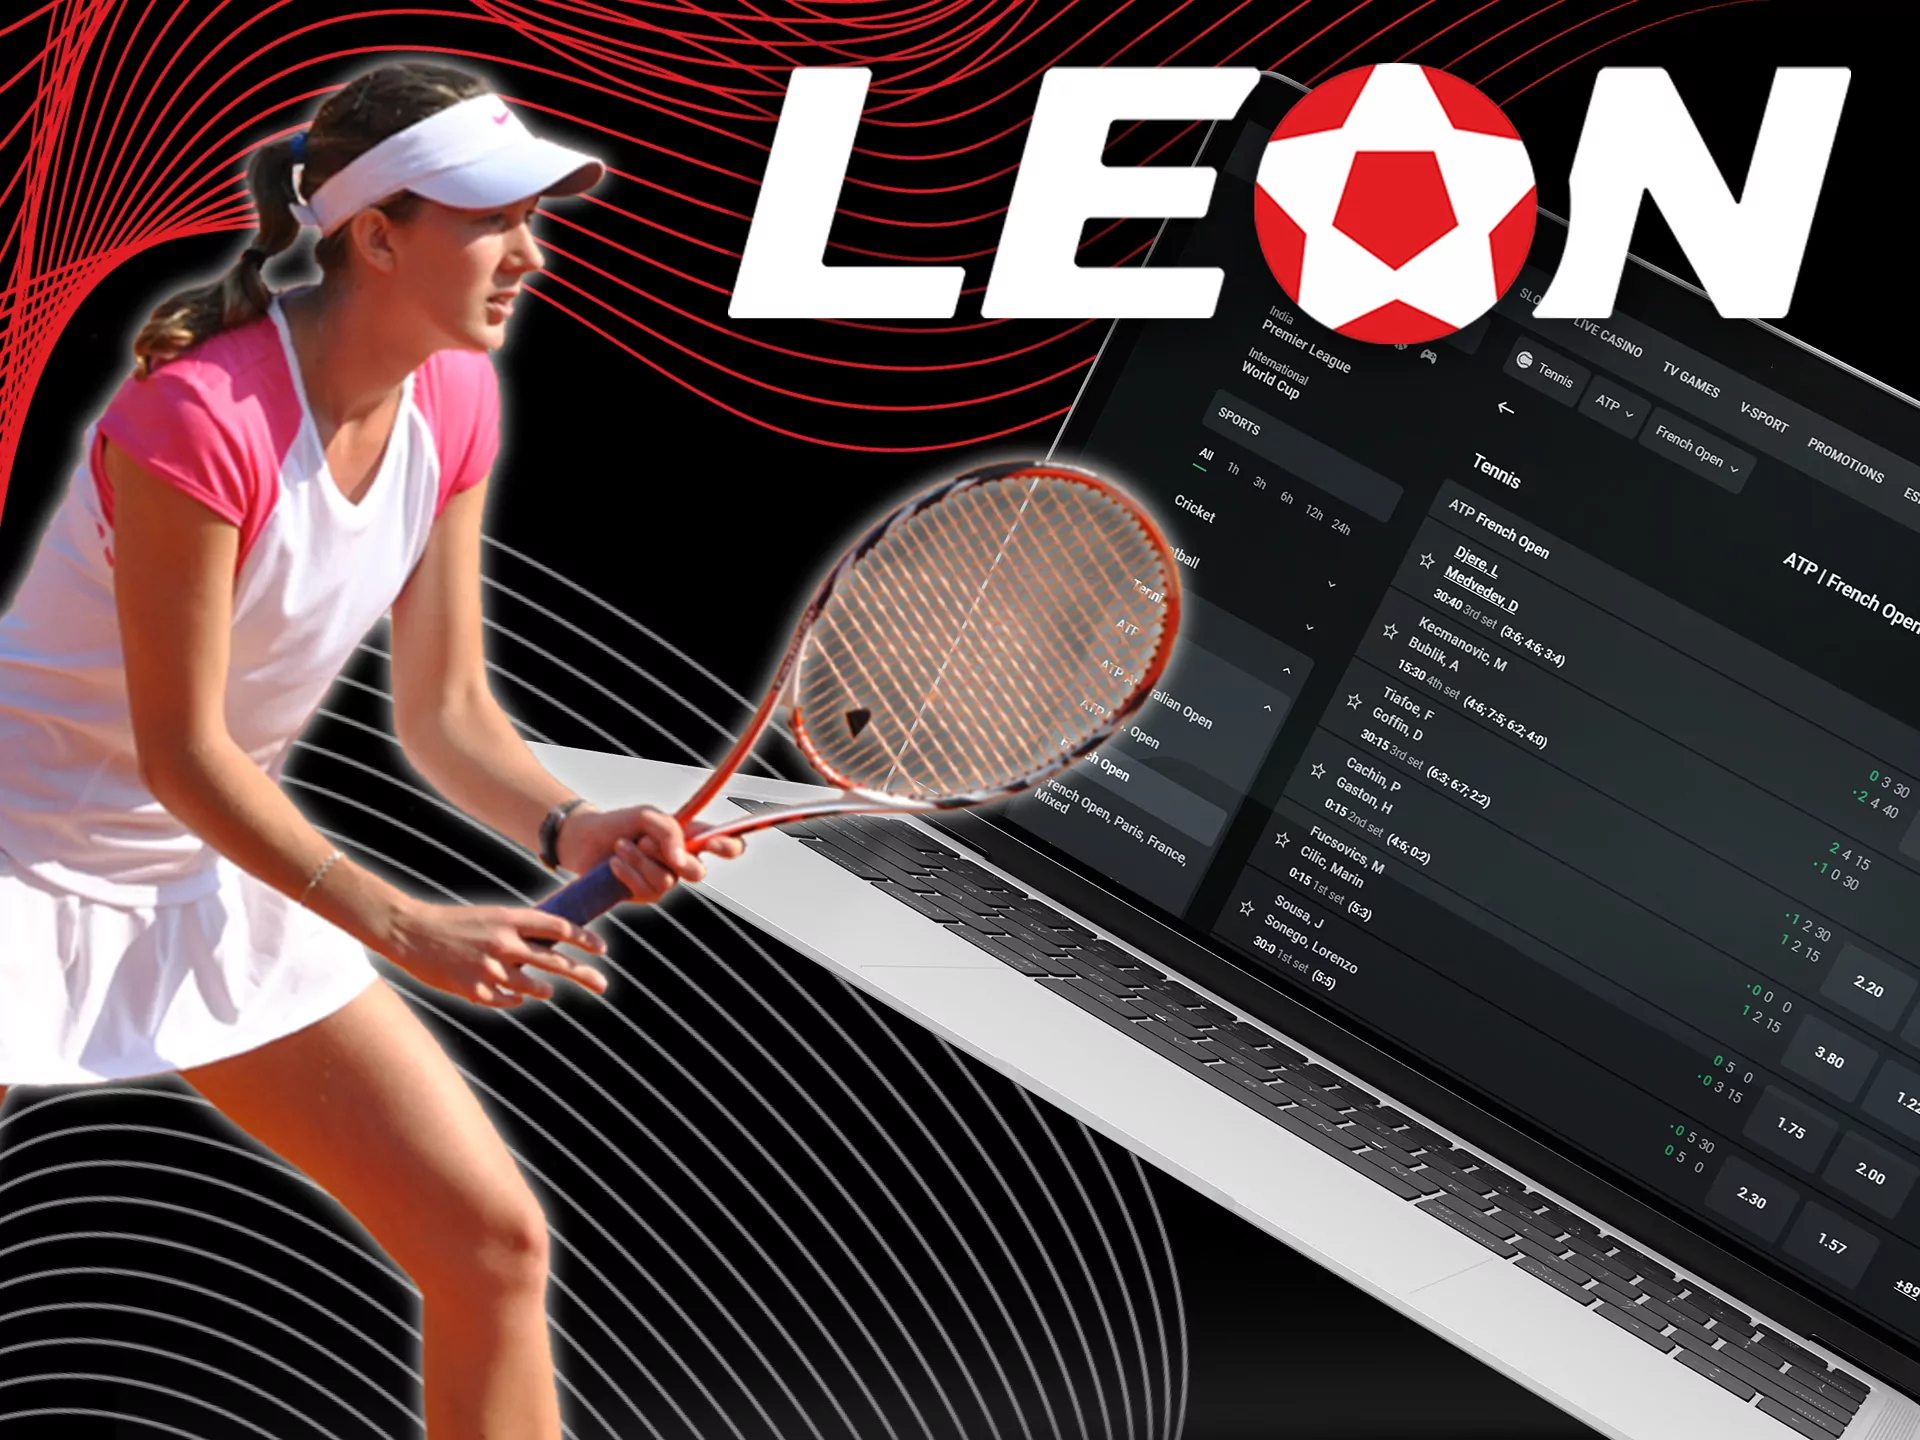 There are many tennis events for betting at Leon Bet.